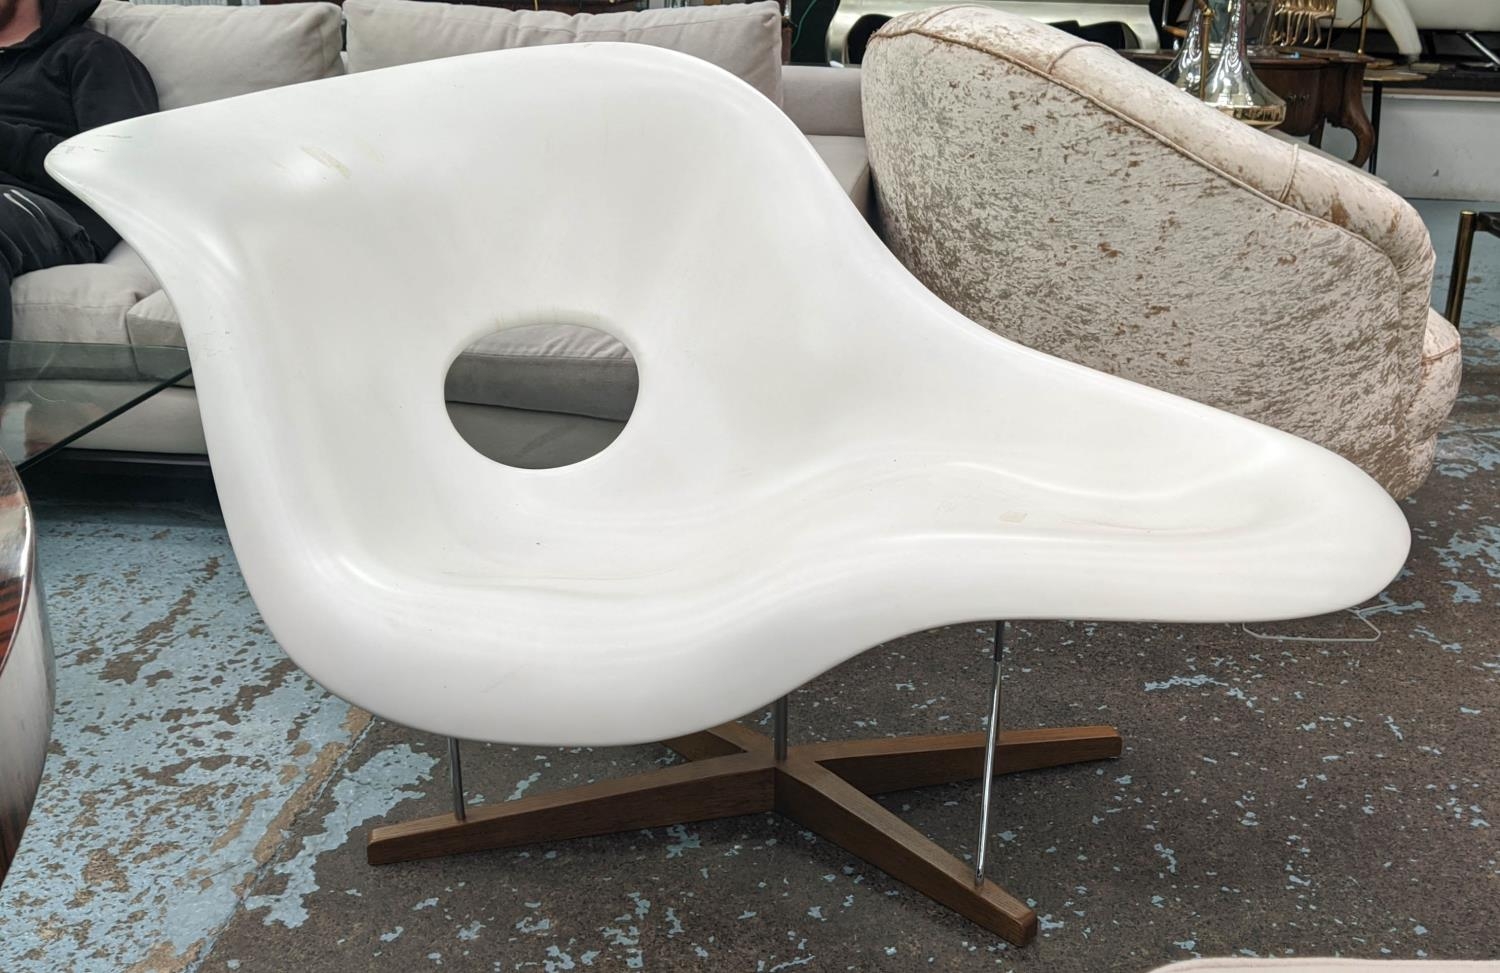 VITRA LA CHAISE LONGUE CHAIR BY CHARLES AND RAY EAMES, 150cm W.